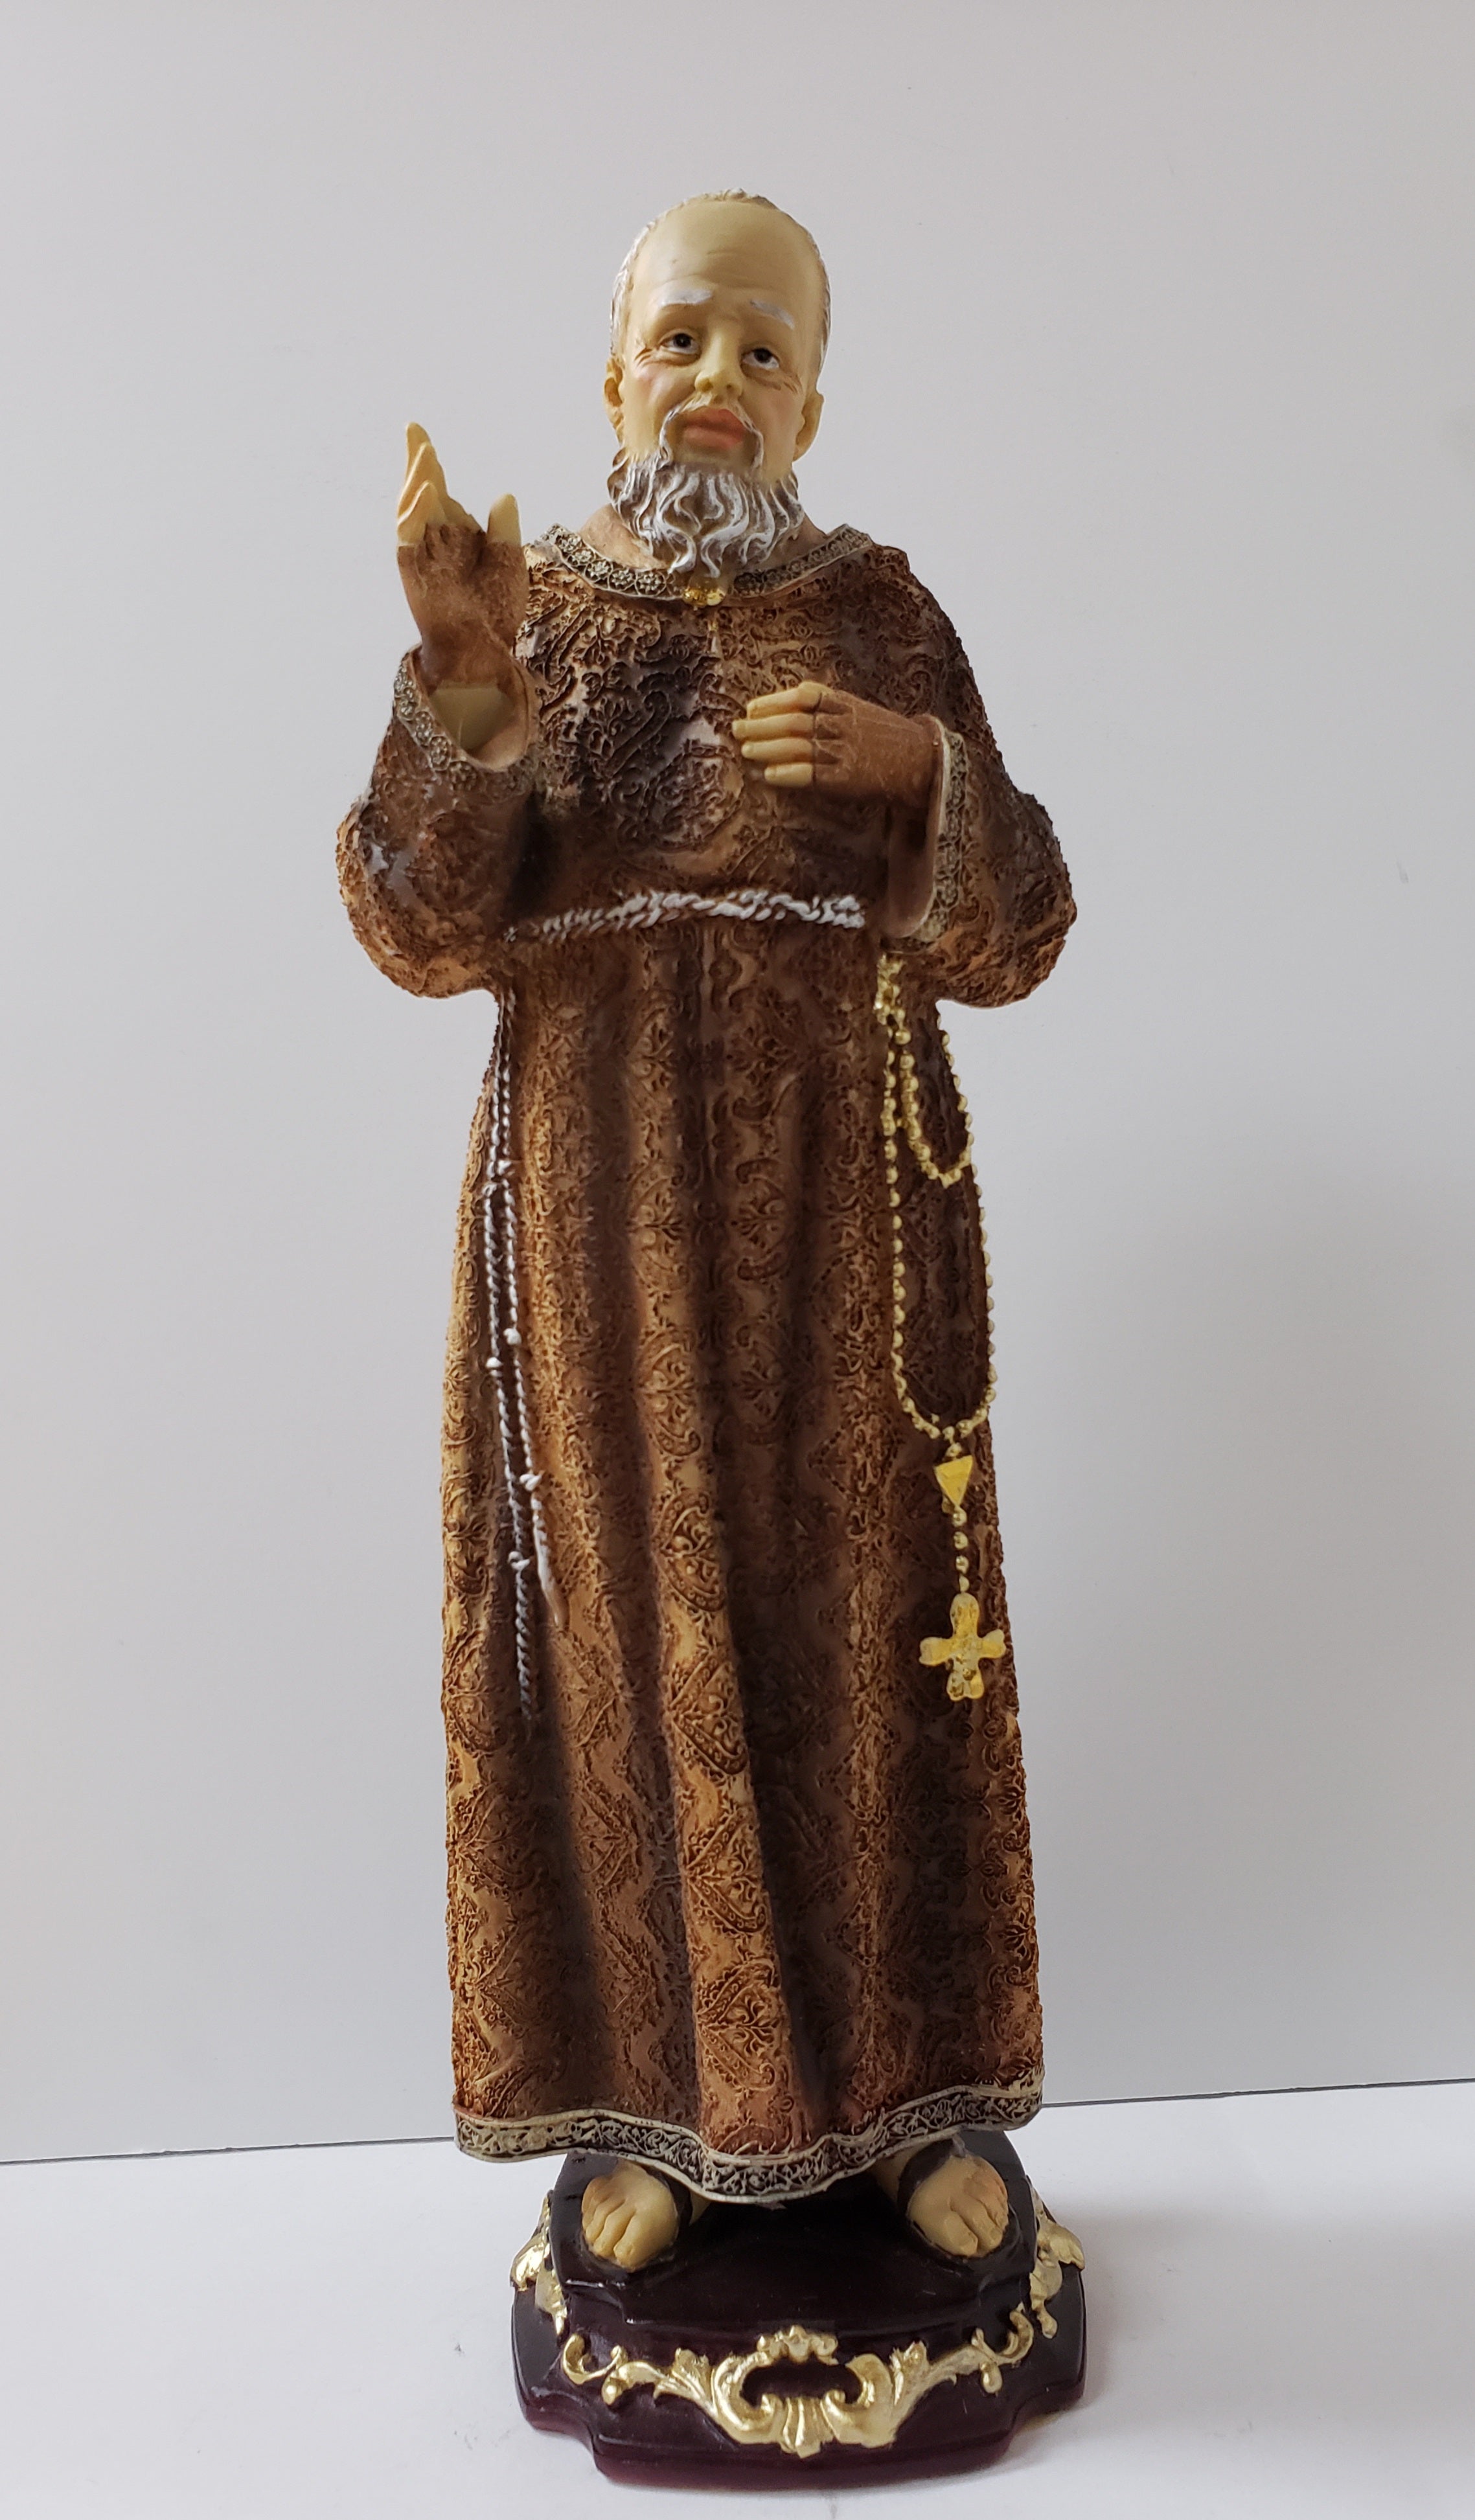 12" Padre Pio statue with hand on heart